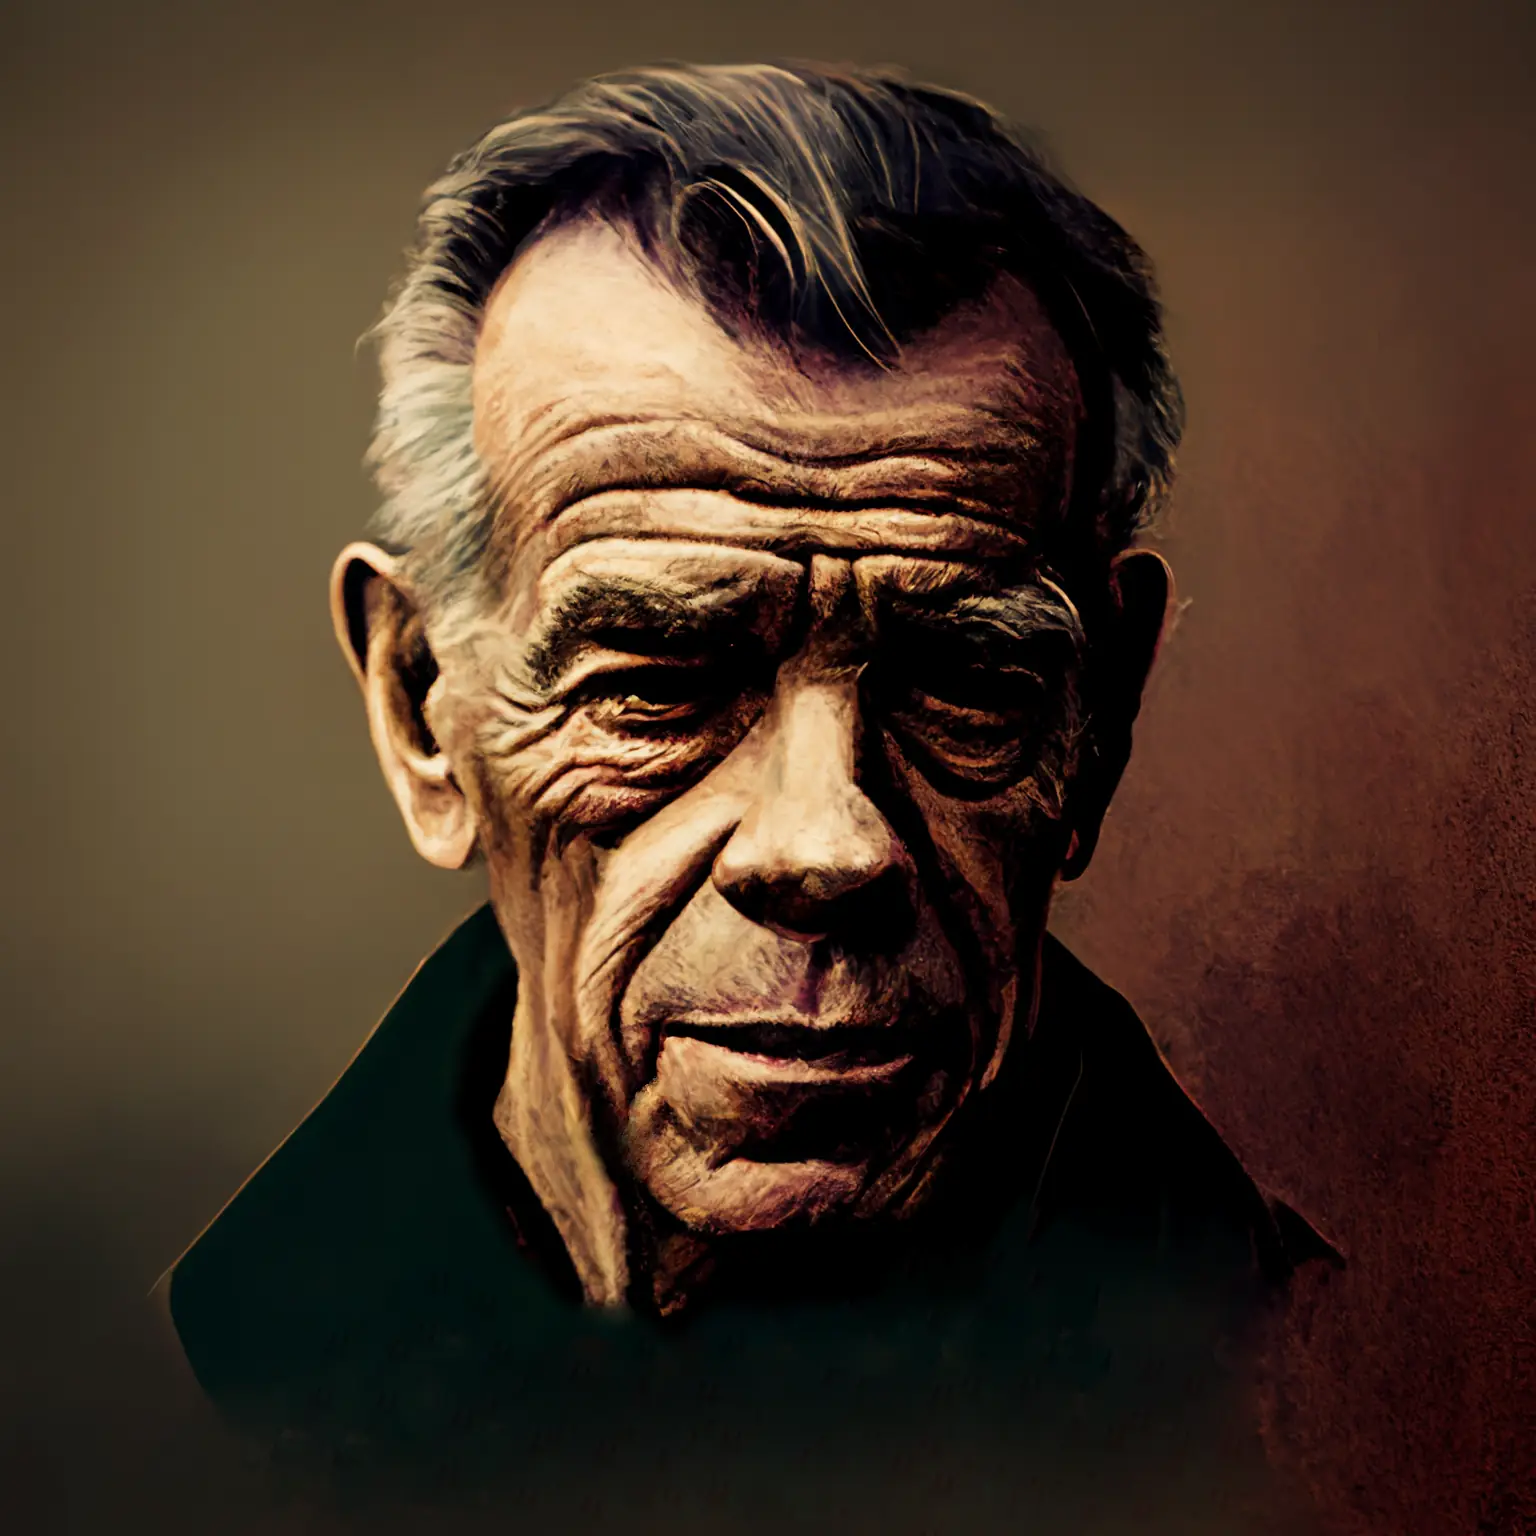 An artistic rendering of Joseph Campbell